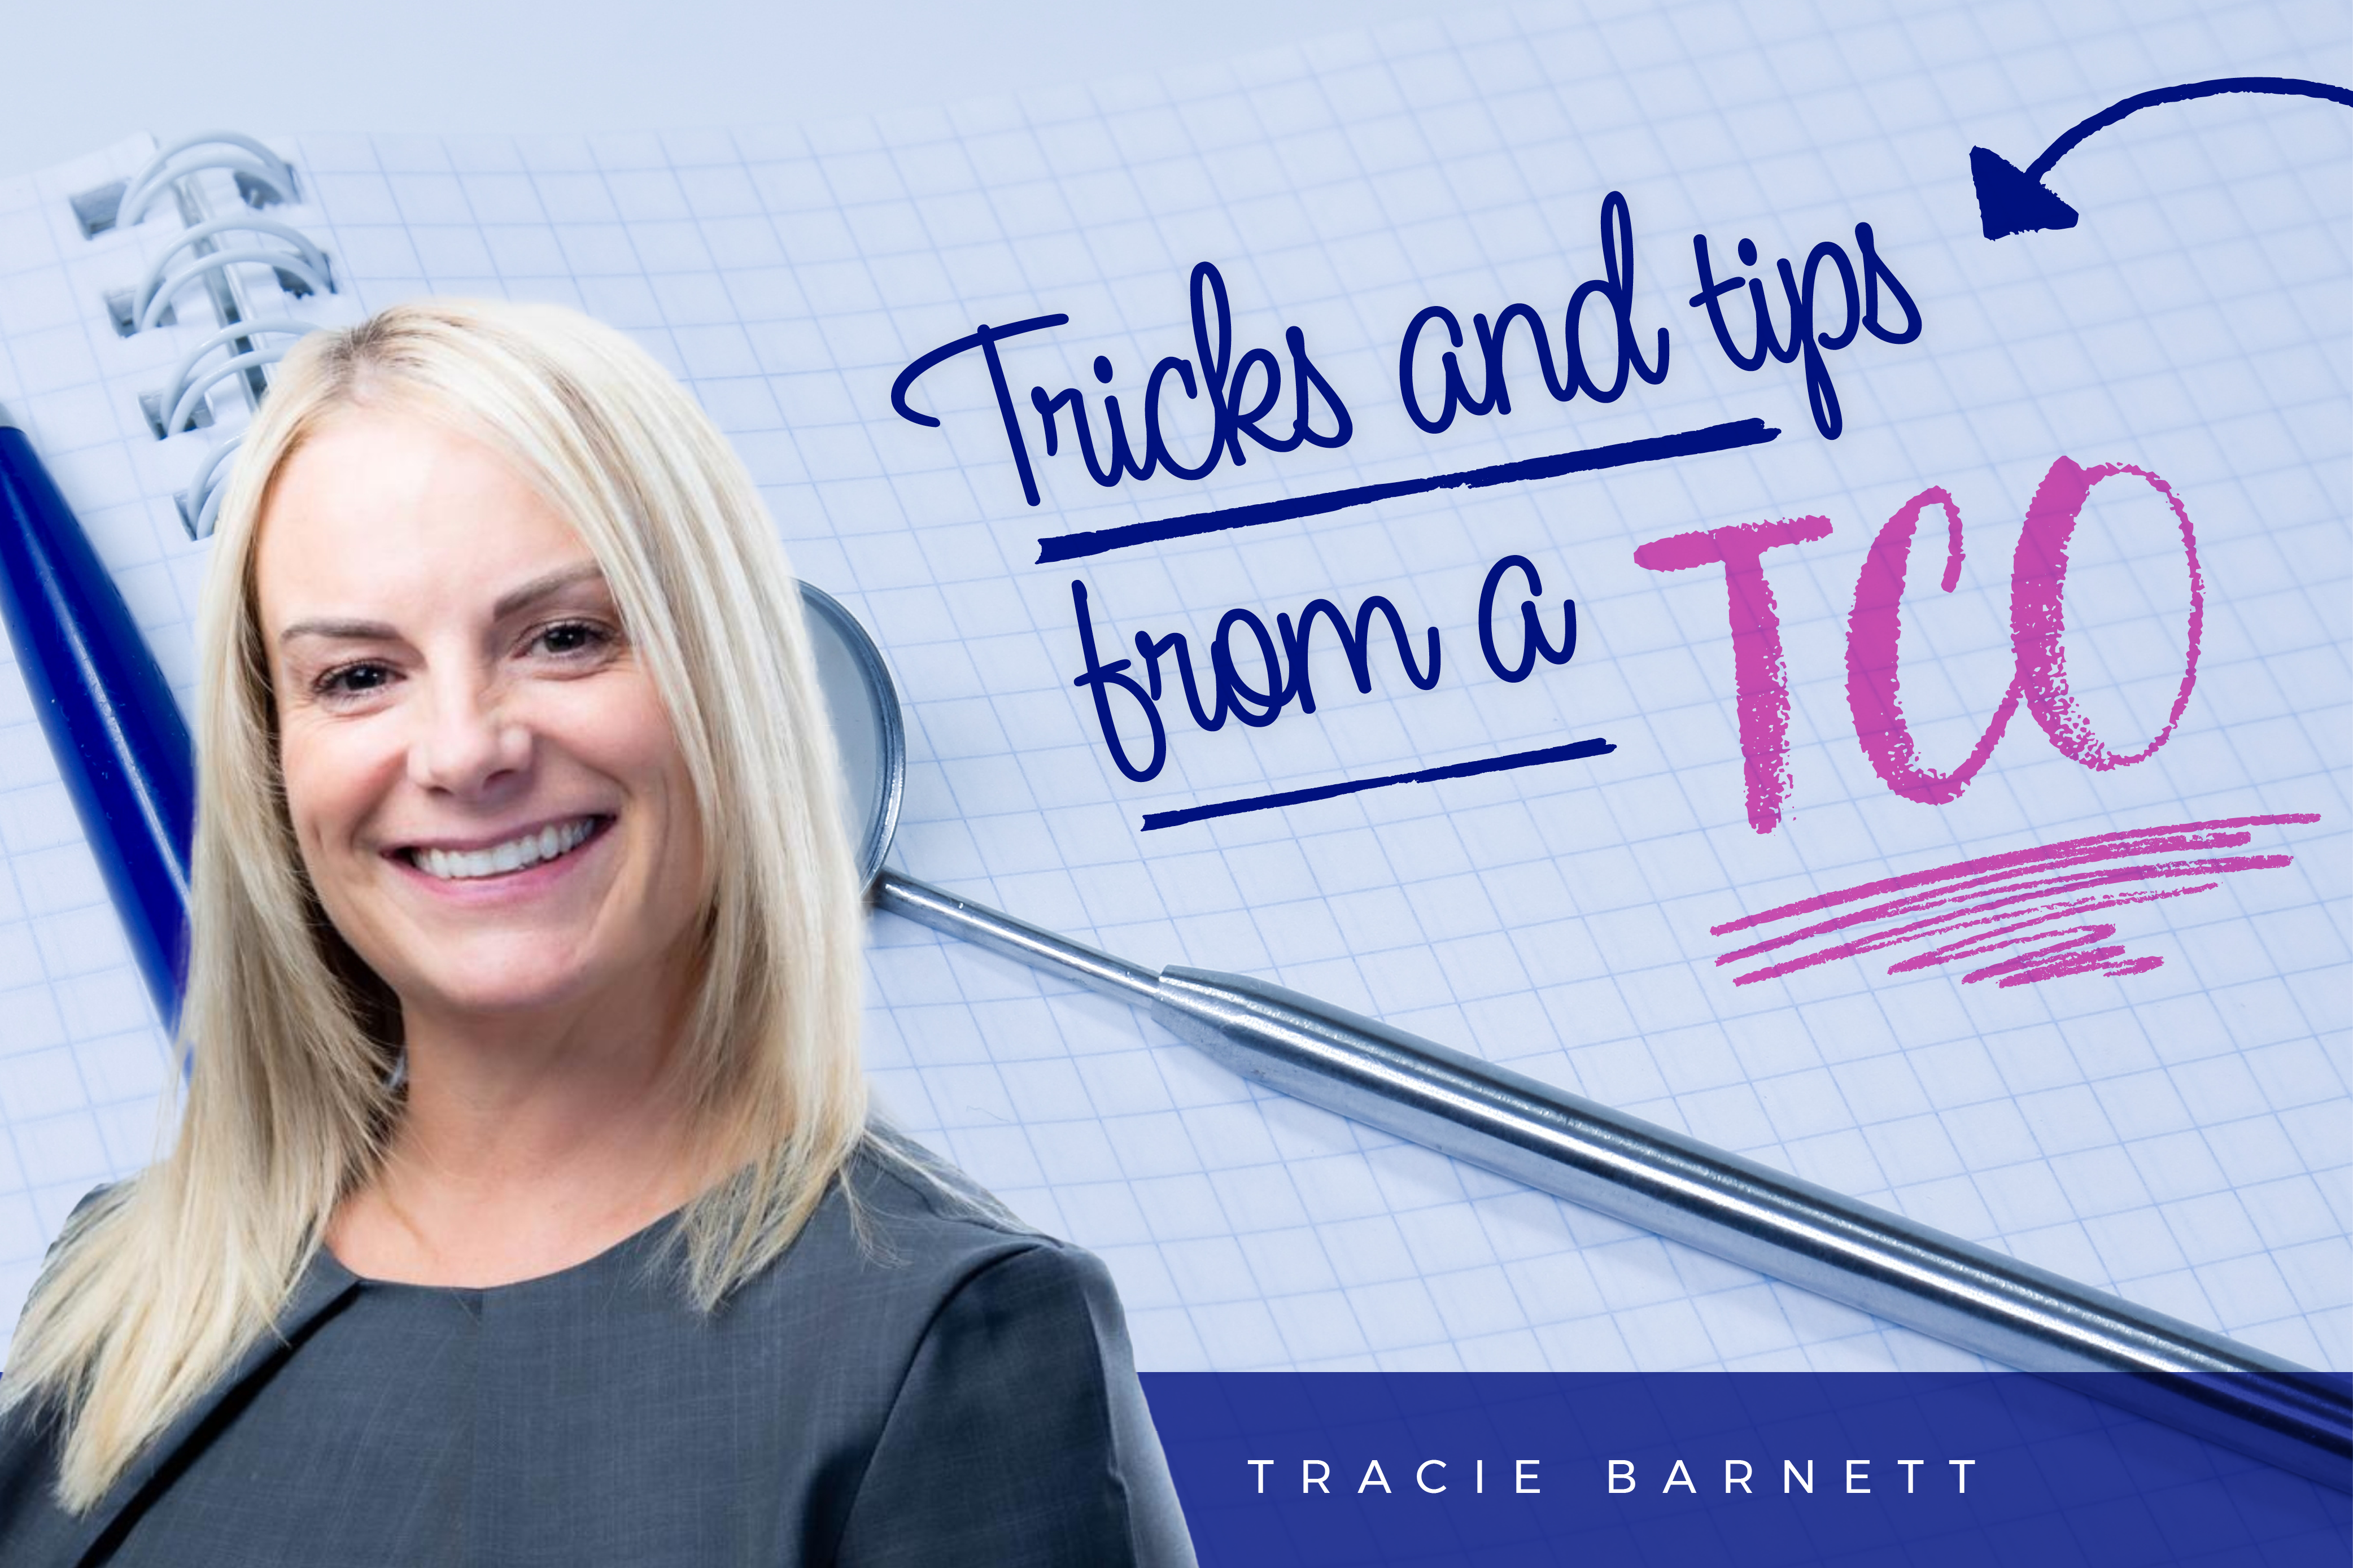 Tracie Barnett discusses why intraoral scanners are an integral piece of equipment for all dental professionals.